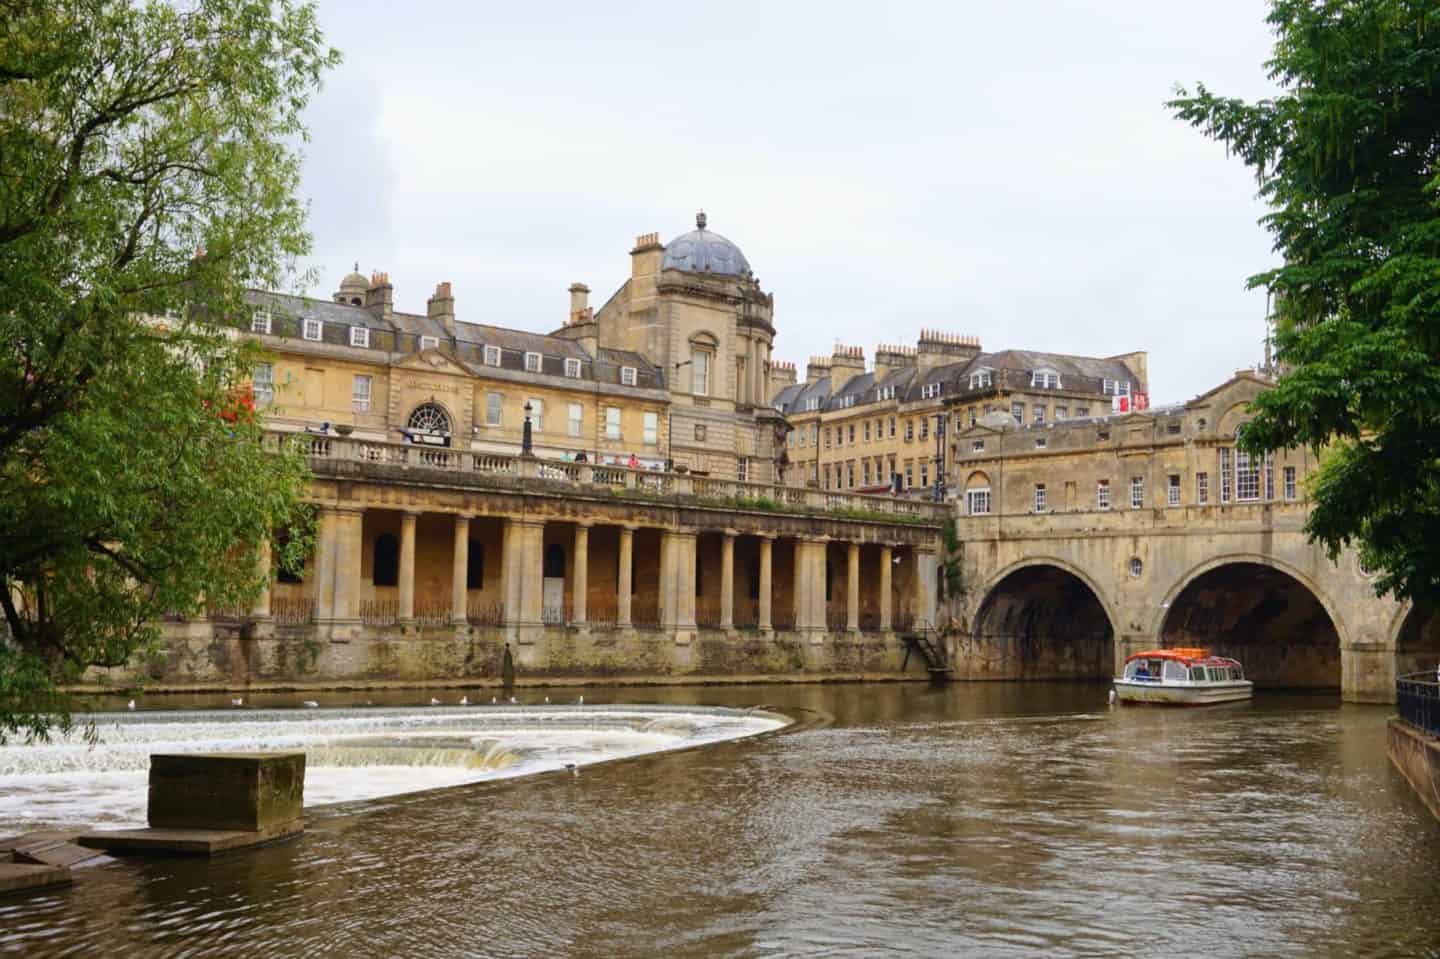 Bath river and old buildings | Bath Day trip from London by train